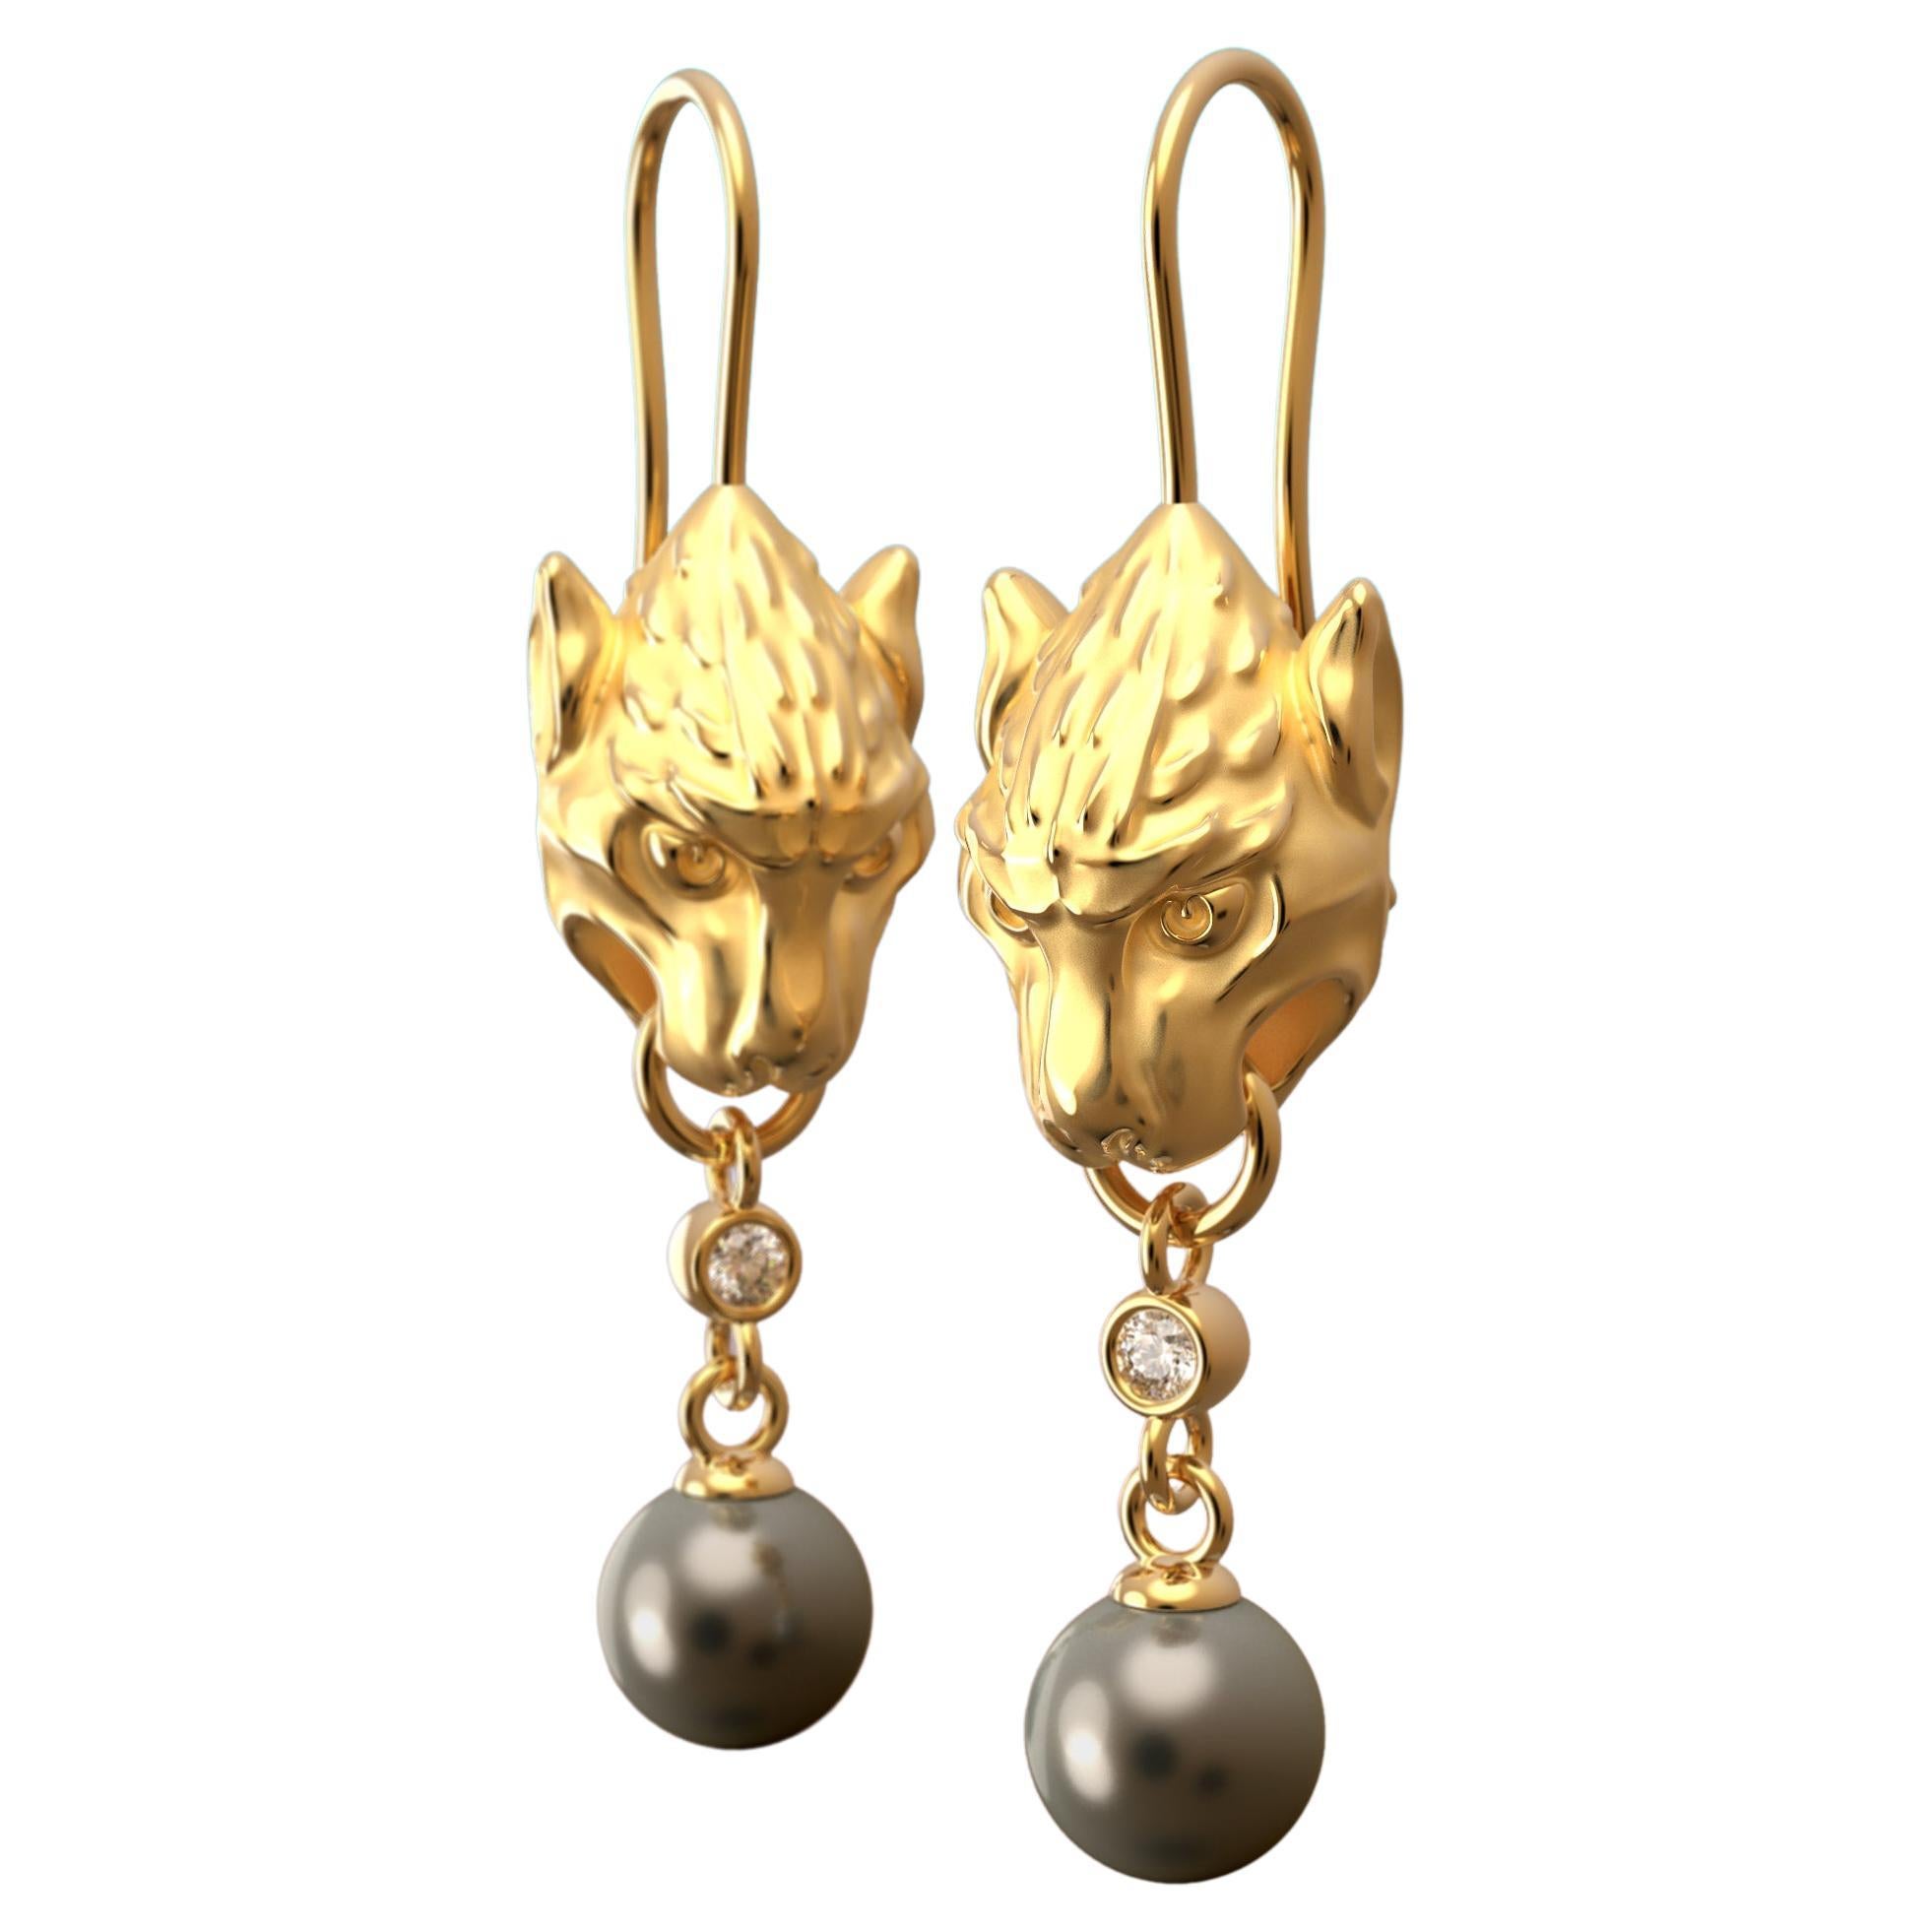  Pearls and Diamonds 14k Gold Earrings, Gothic Gargoyle Earrings Made in Italy